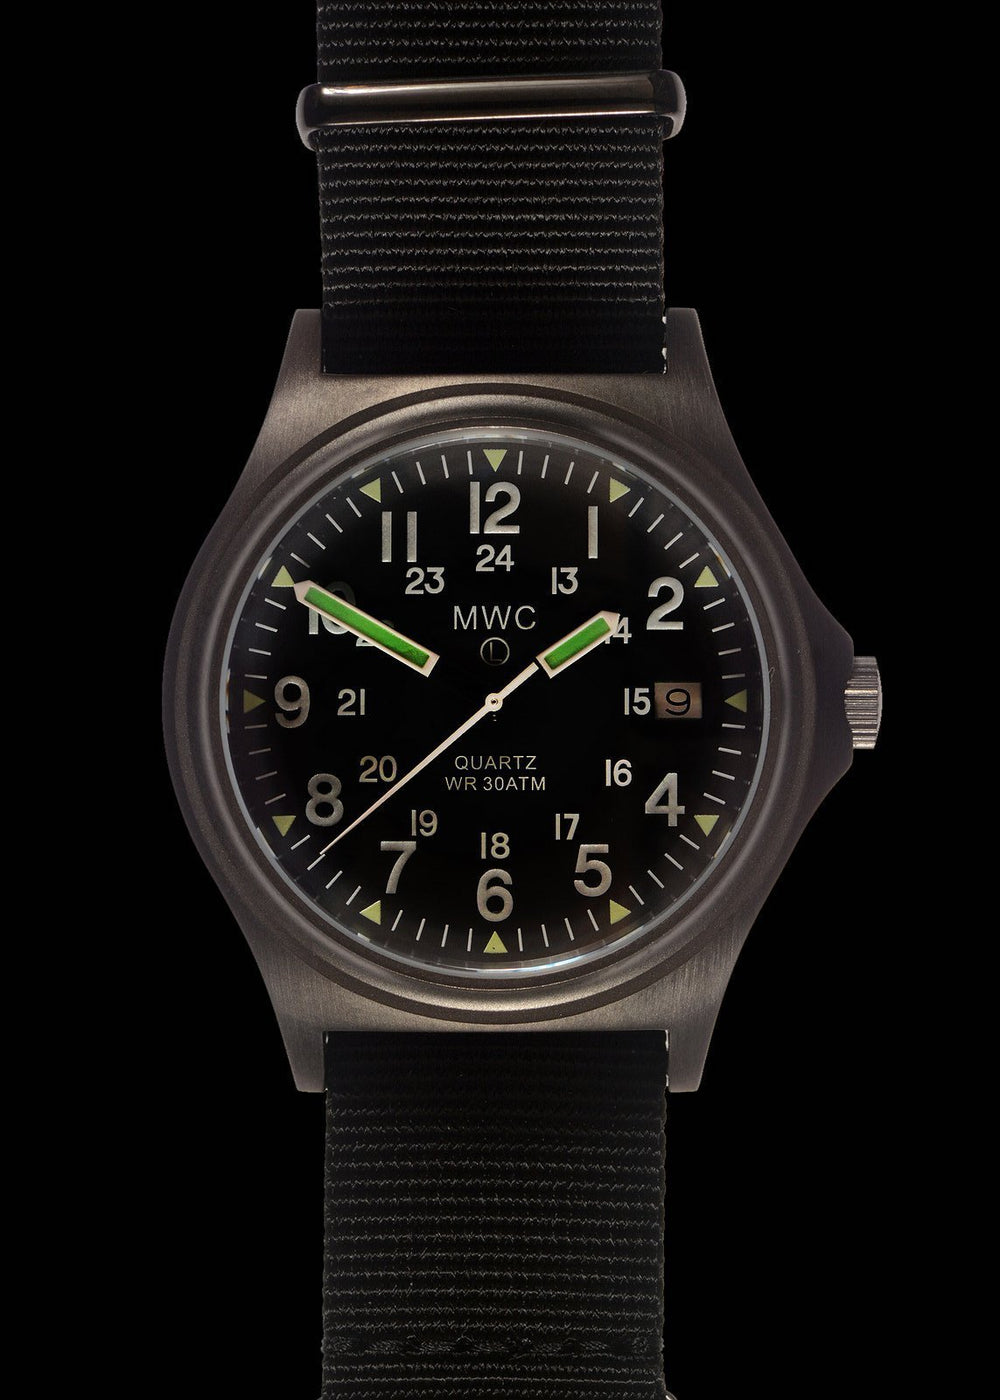 MWC Infantry Watch - G10 300m / 1000ft Water Resistant, Limited Edition Military, Brushed Gunmetal, Sapphire Crystal, NATO Straps